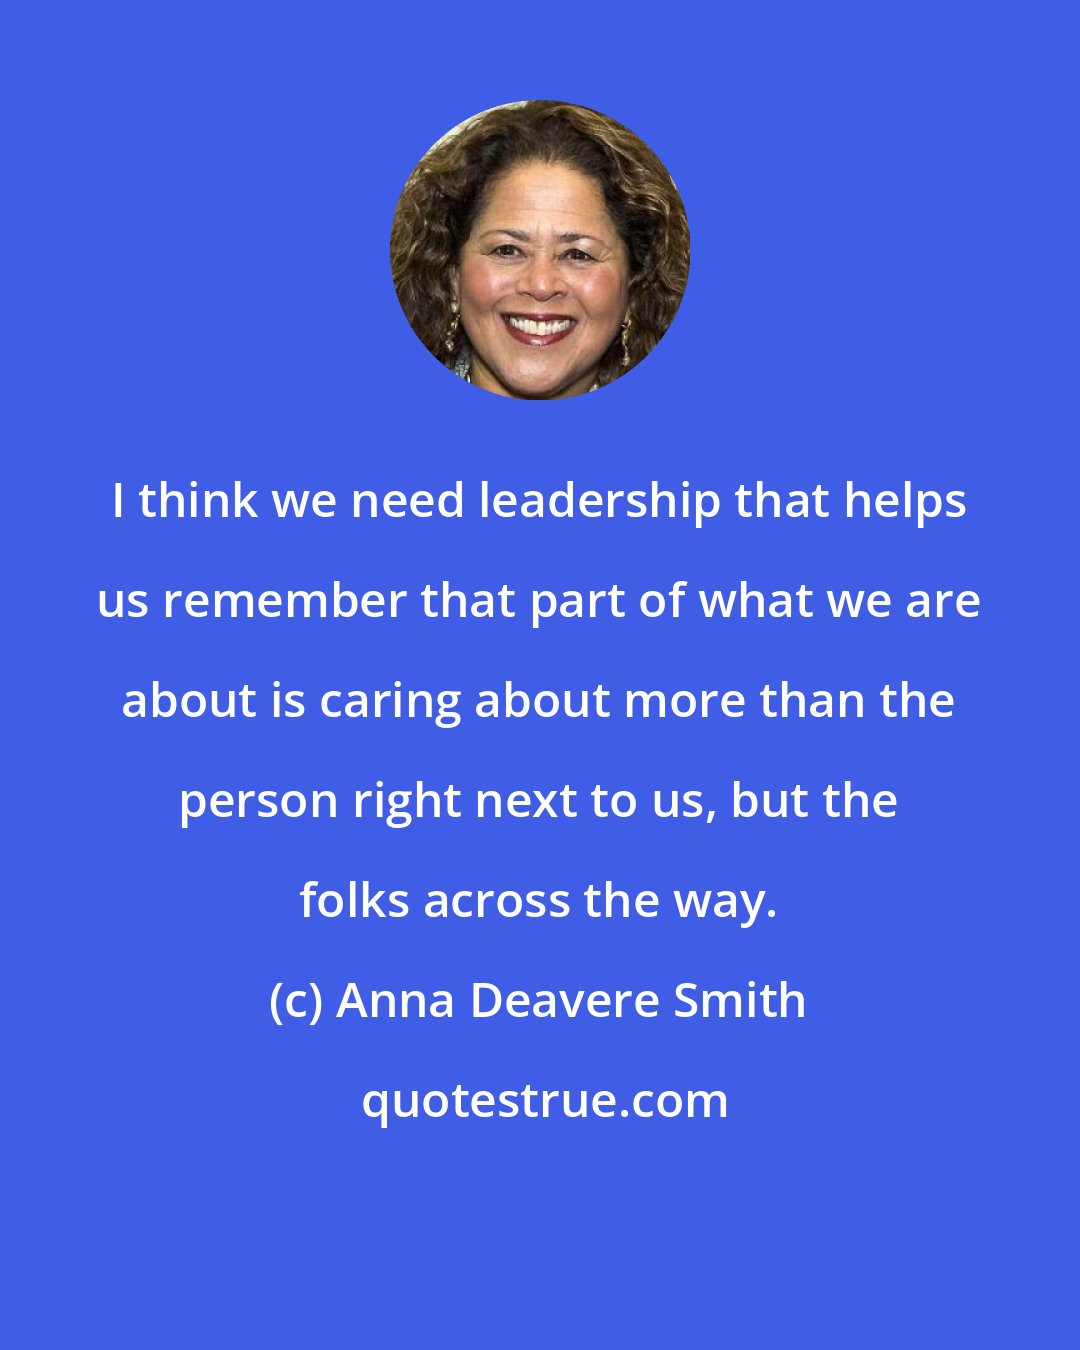 Anna Deavere Smith: I think we need leadership that helps us remember that part of what we are about is caring about more than the person right next to us, but the folks across the way.